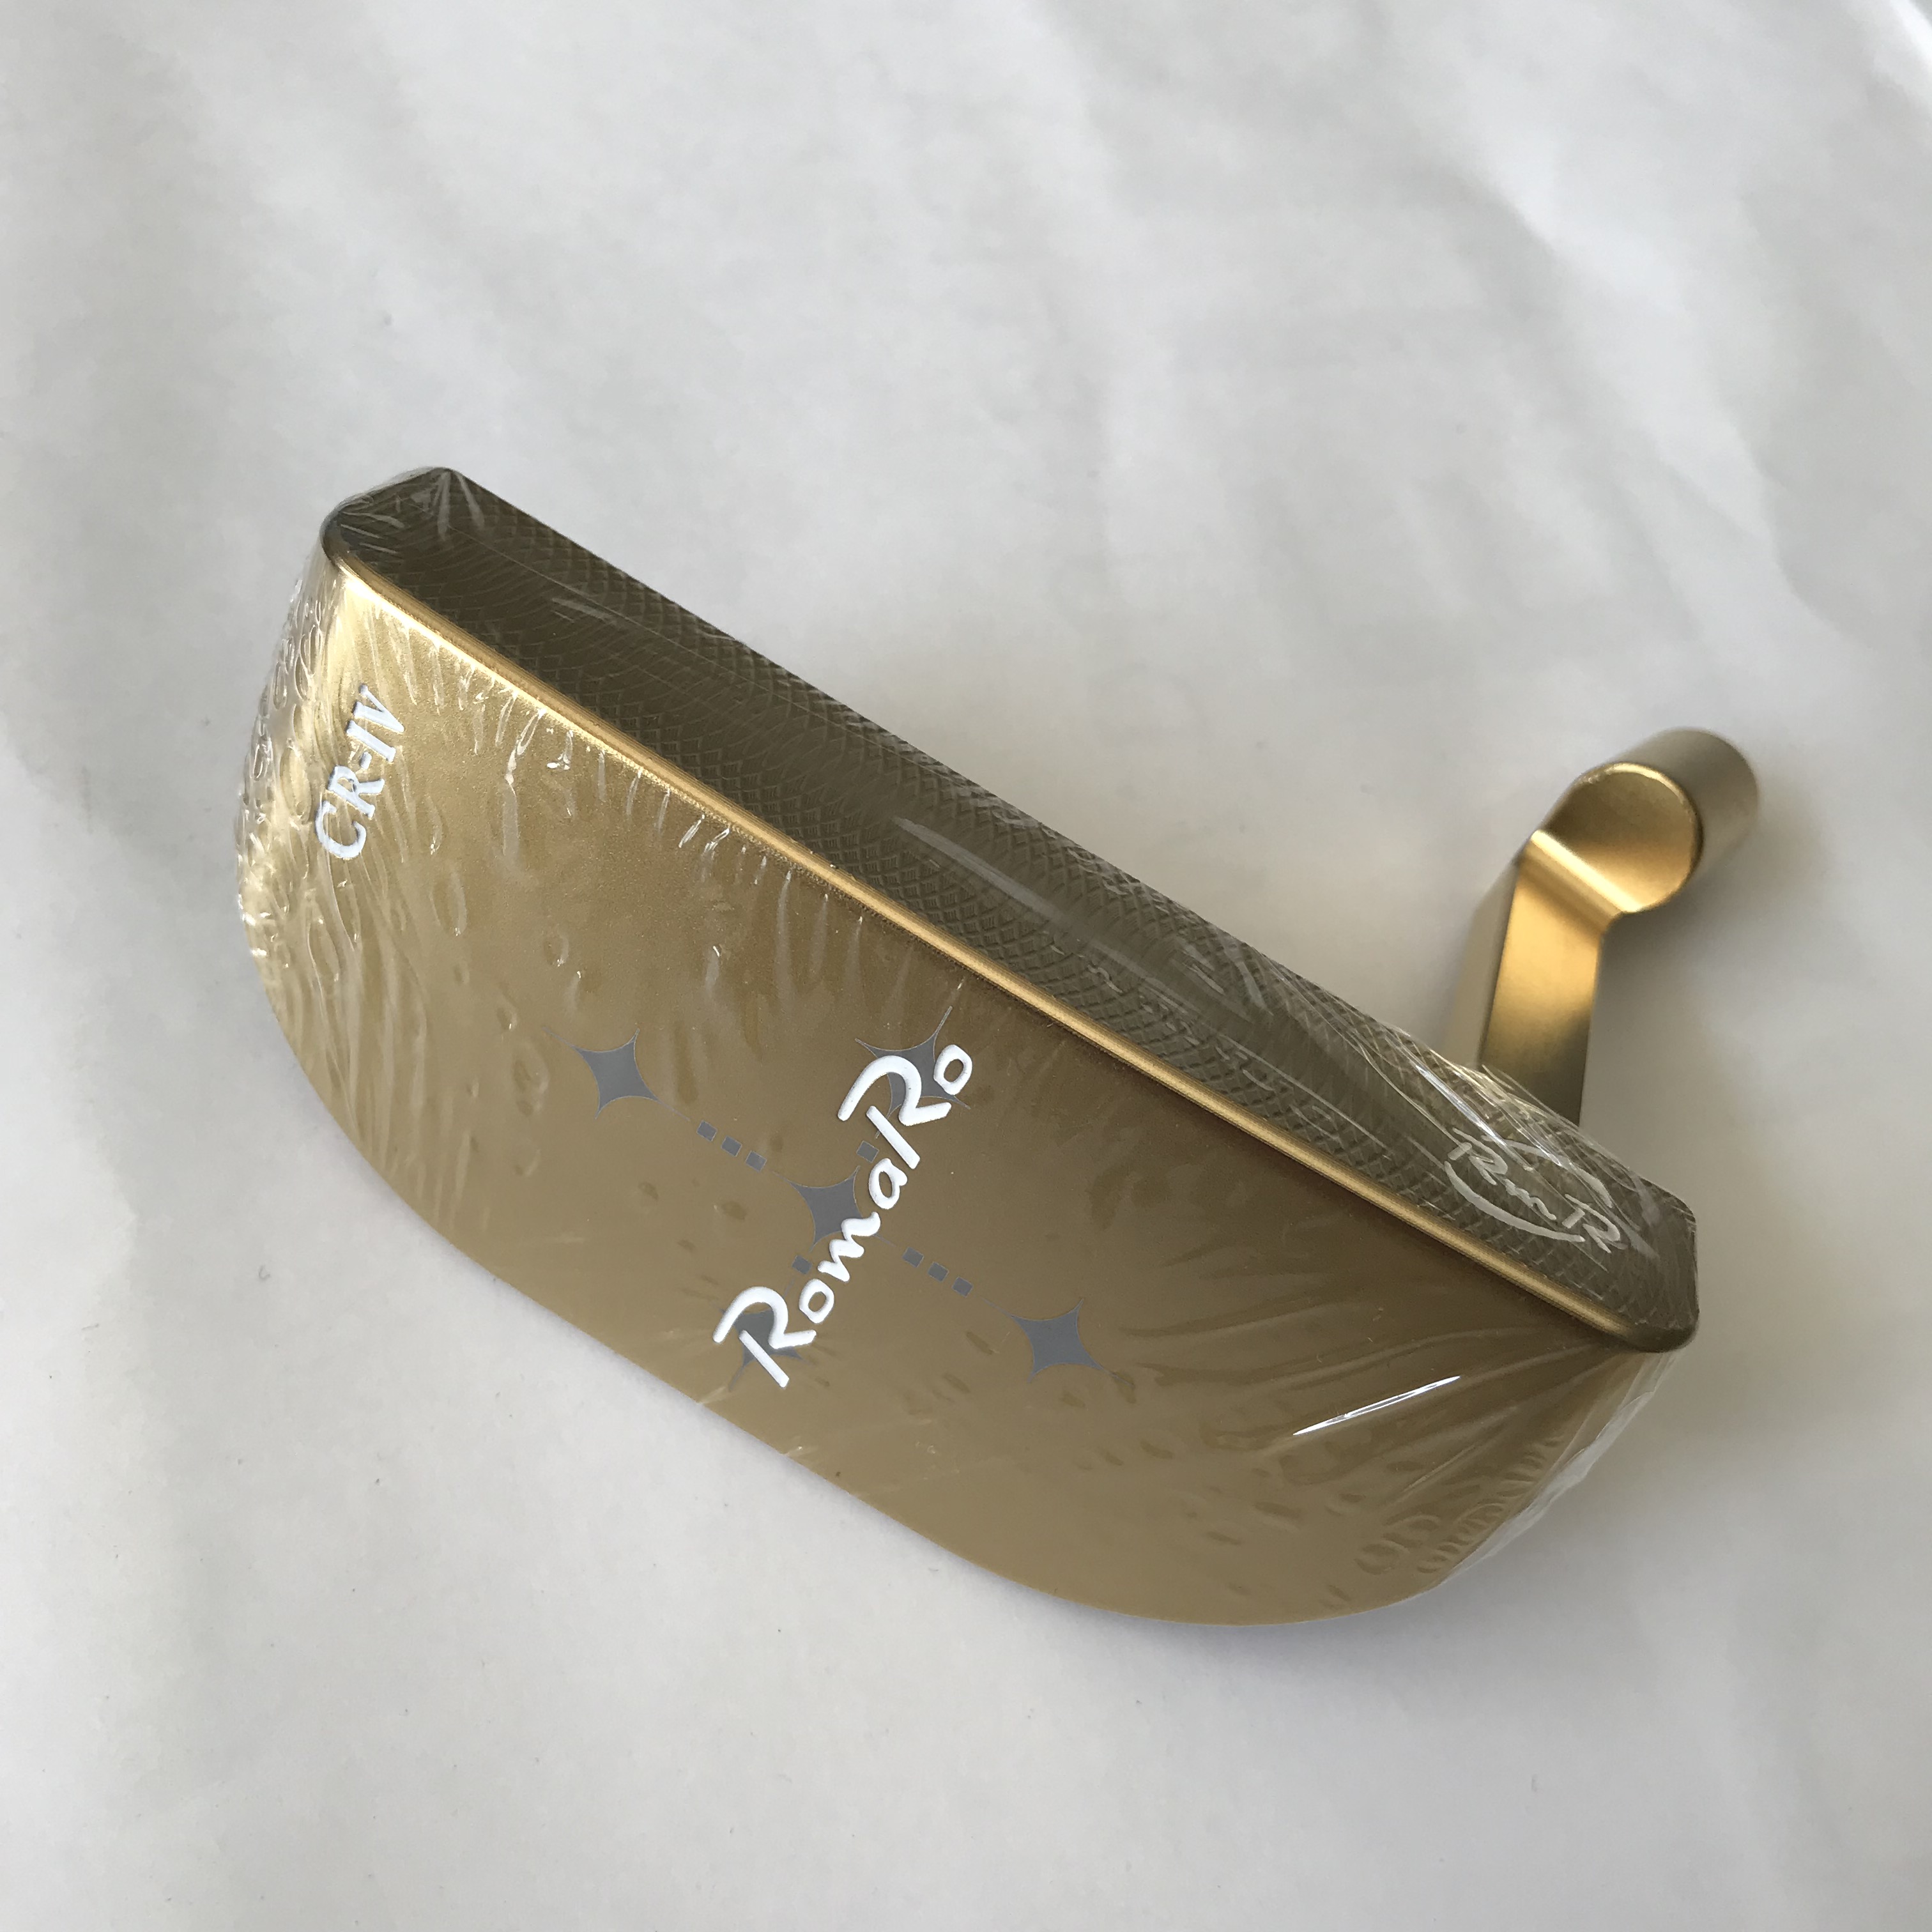 

RomaRo CR-IV Putter Head Gold Golf Brand Clubs Heads Putters Mens Womens Sports New Limited Edition (Only the head, without shaft and grip)